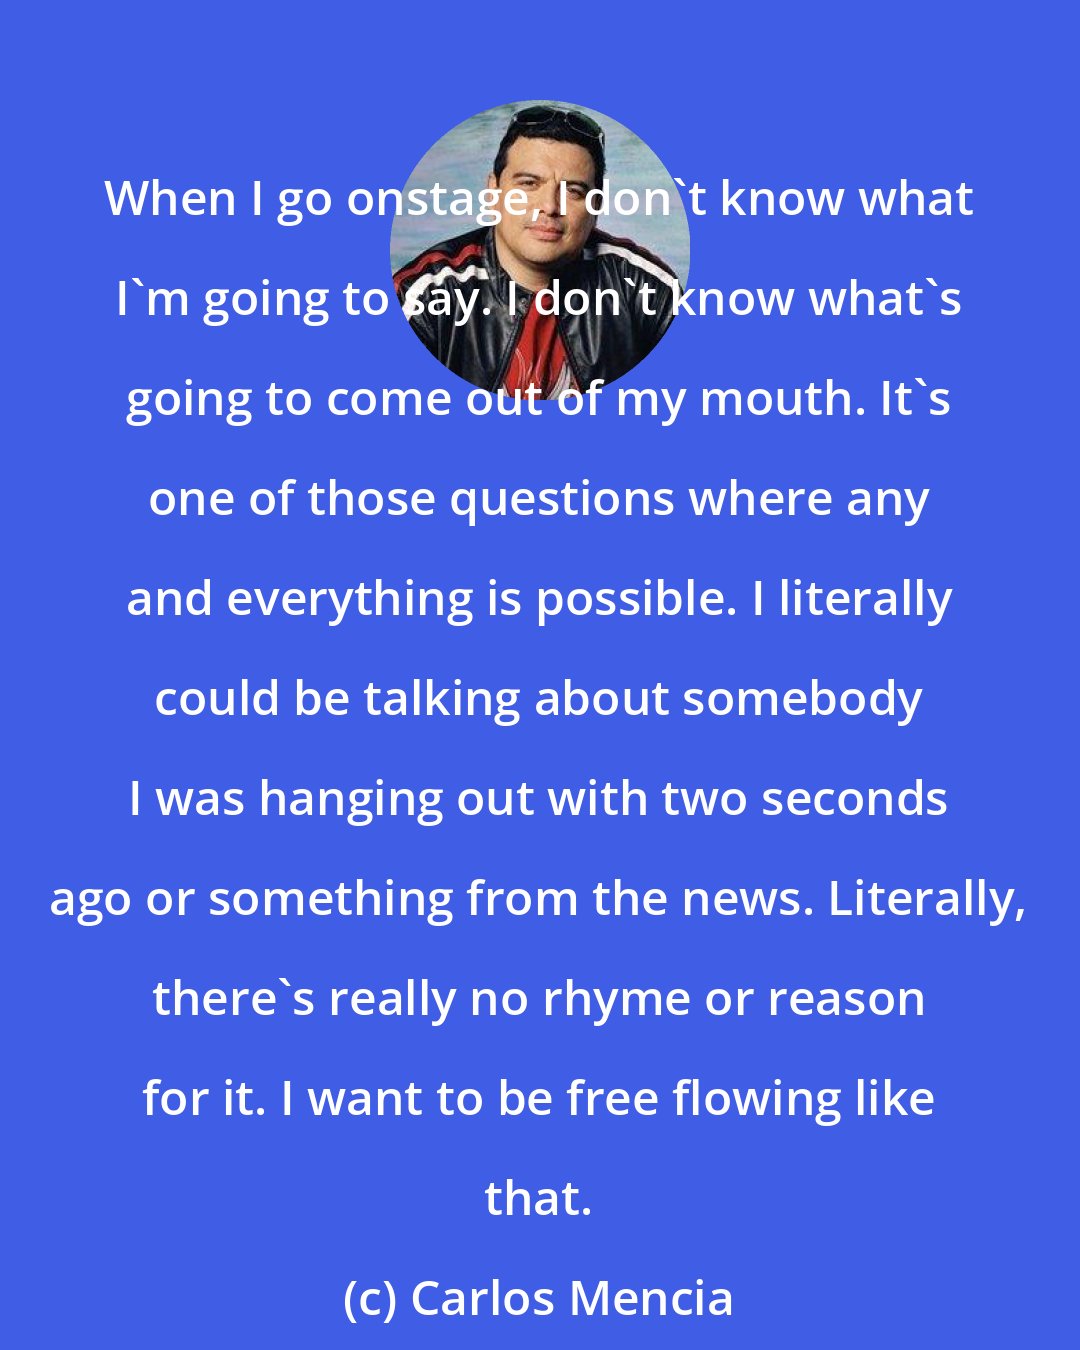 Carlos Mencia: When I go onstage, I don't know what I'm going to say. I don't know what's going to come out of my mouth. It's one of those questions where any and everything is possible. I literally could be talking about somebody I was hanging out with two seconds ago or something from the news. Literally, there's really no rhyme or reason for it. I want to be free flowing like that.